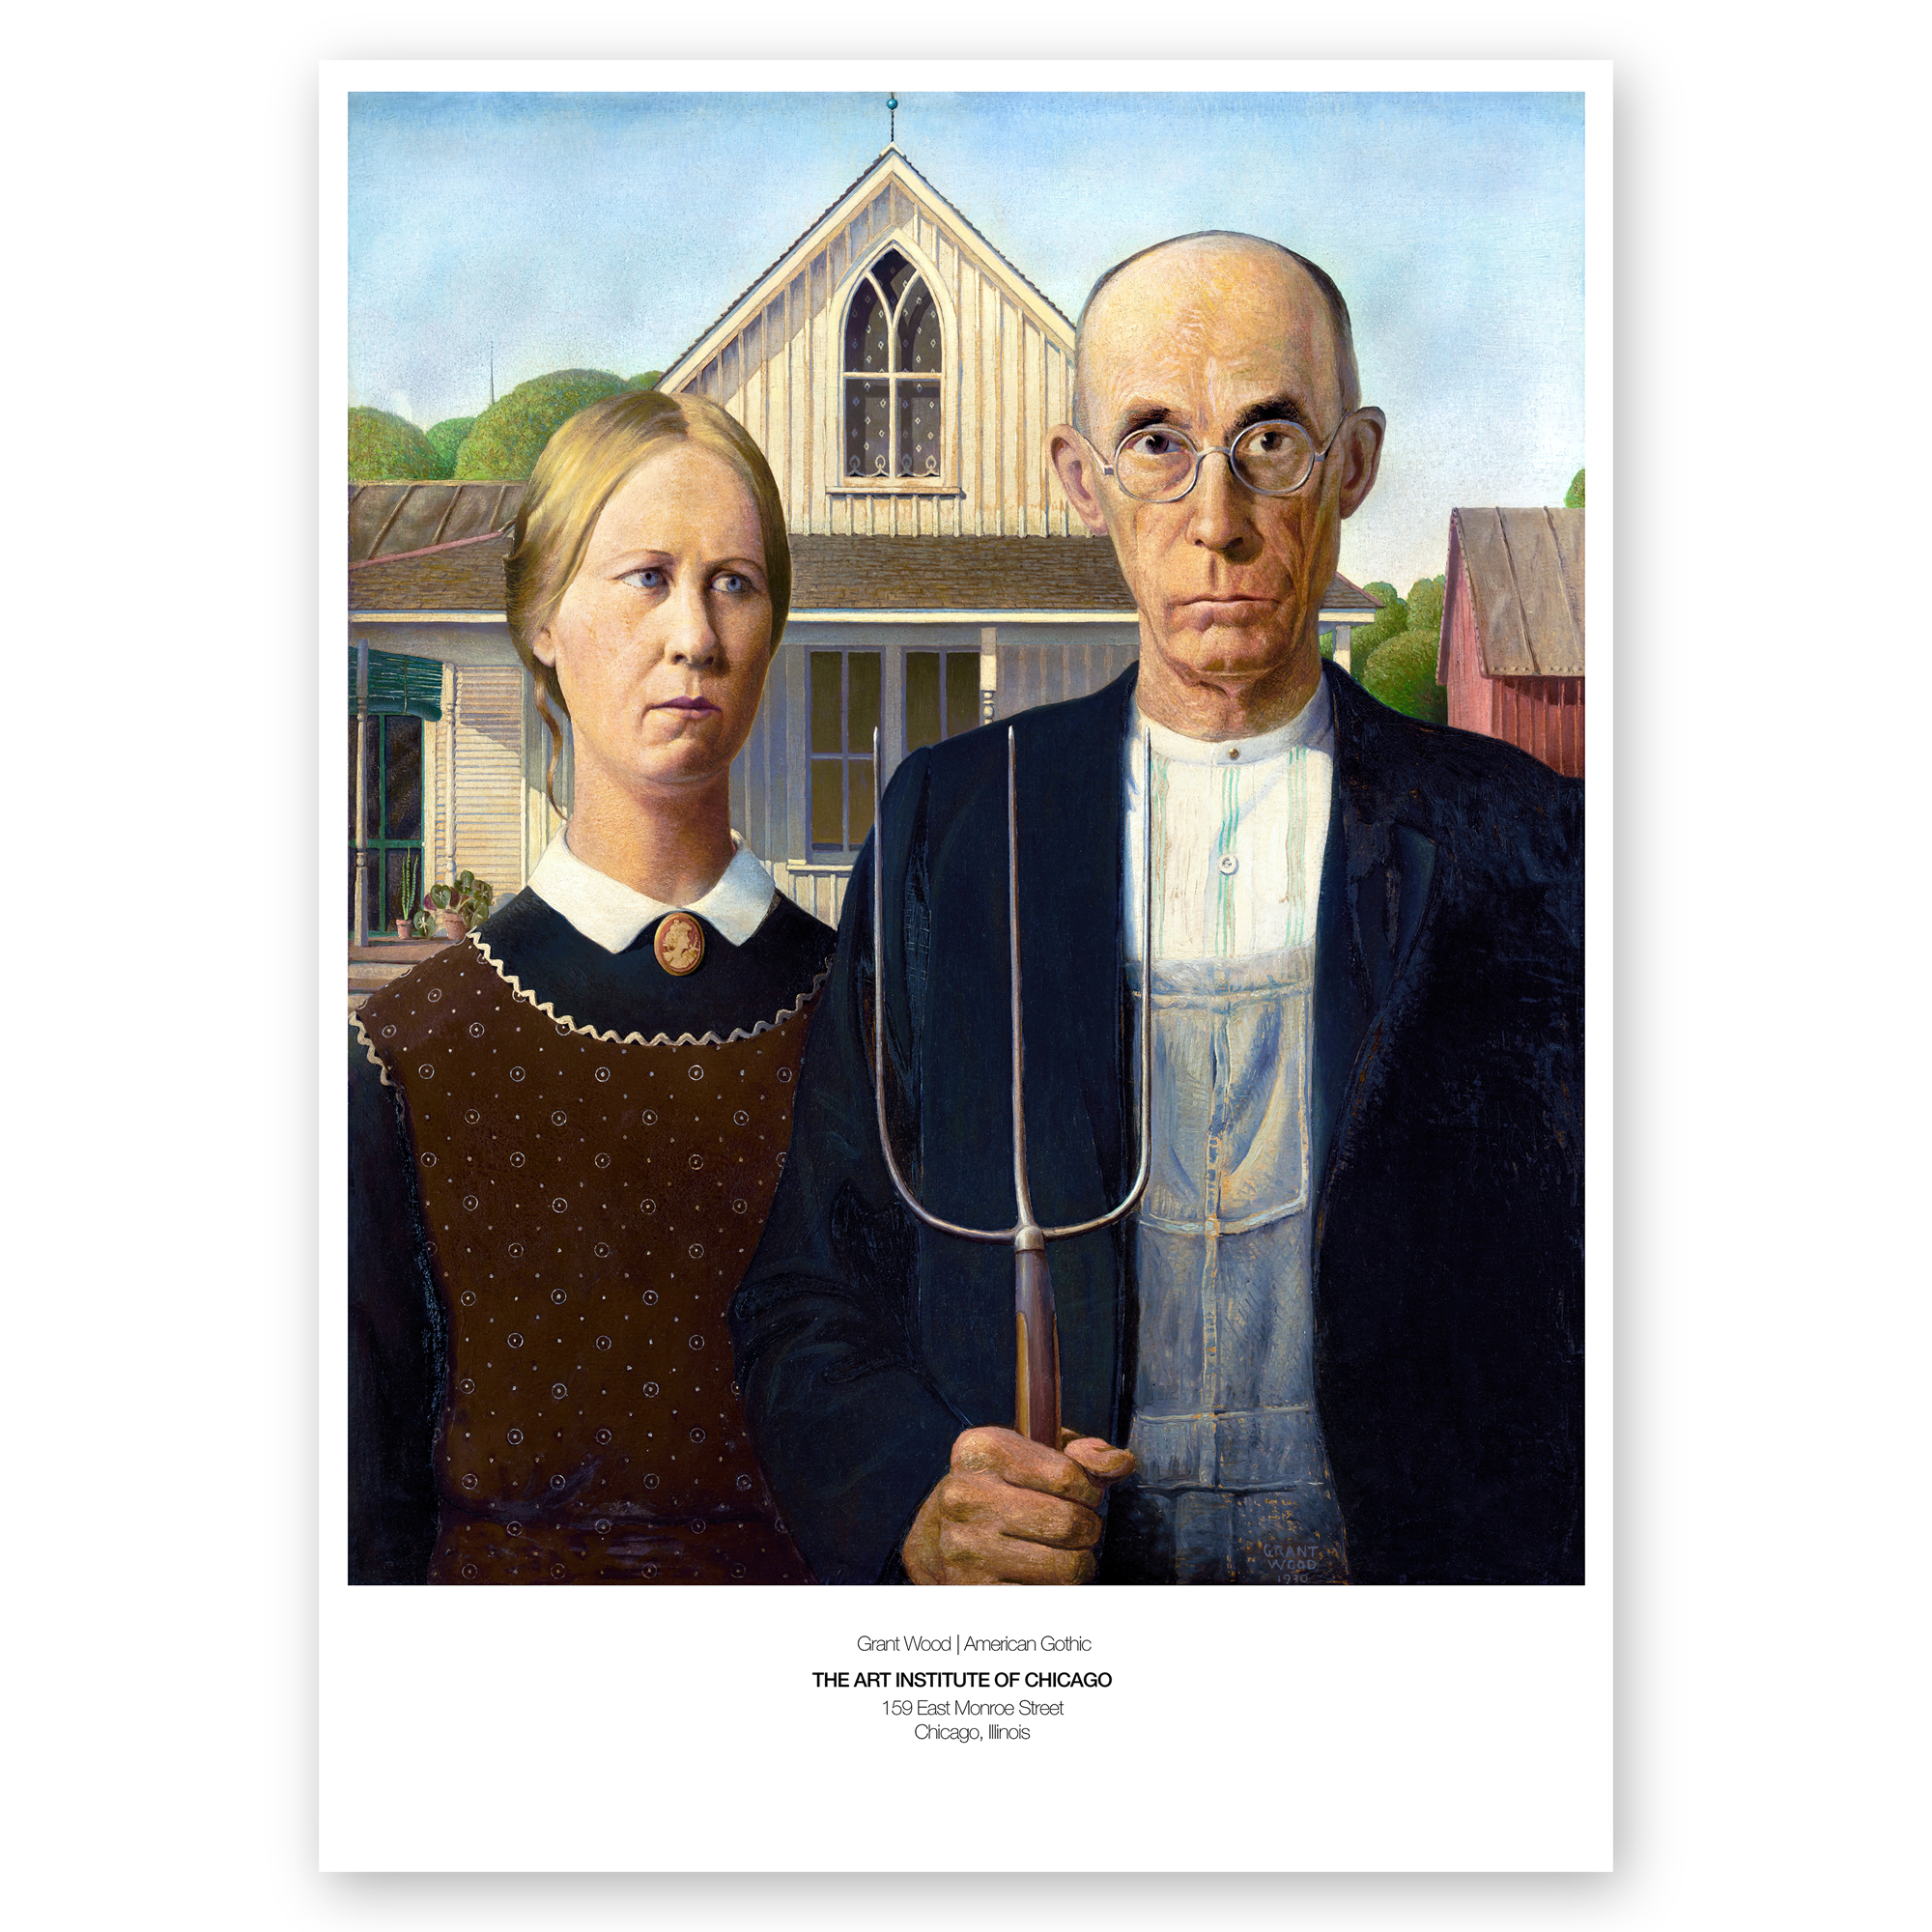 Grant Wood Poster - American Gothic